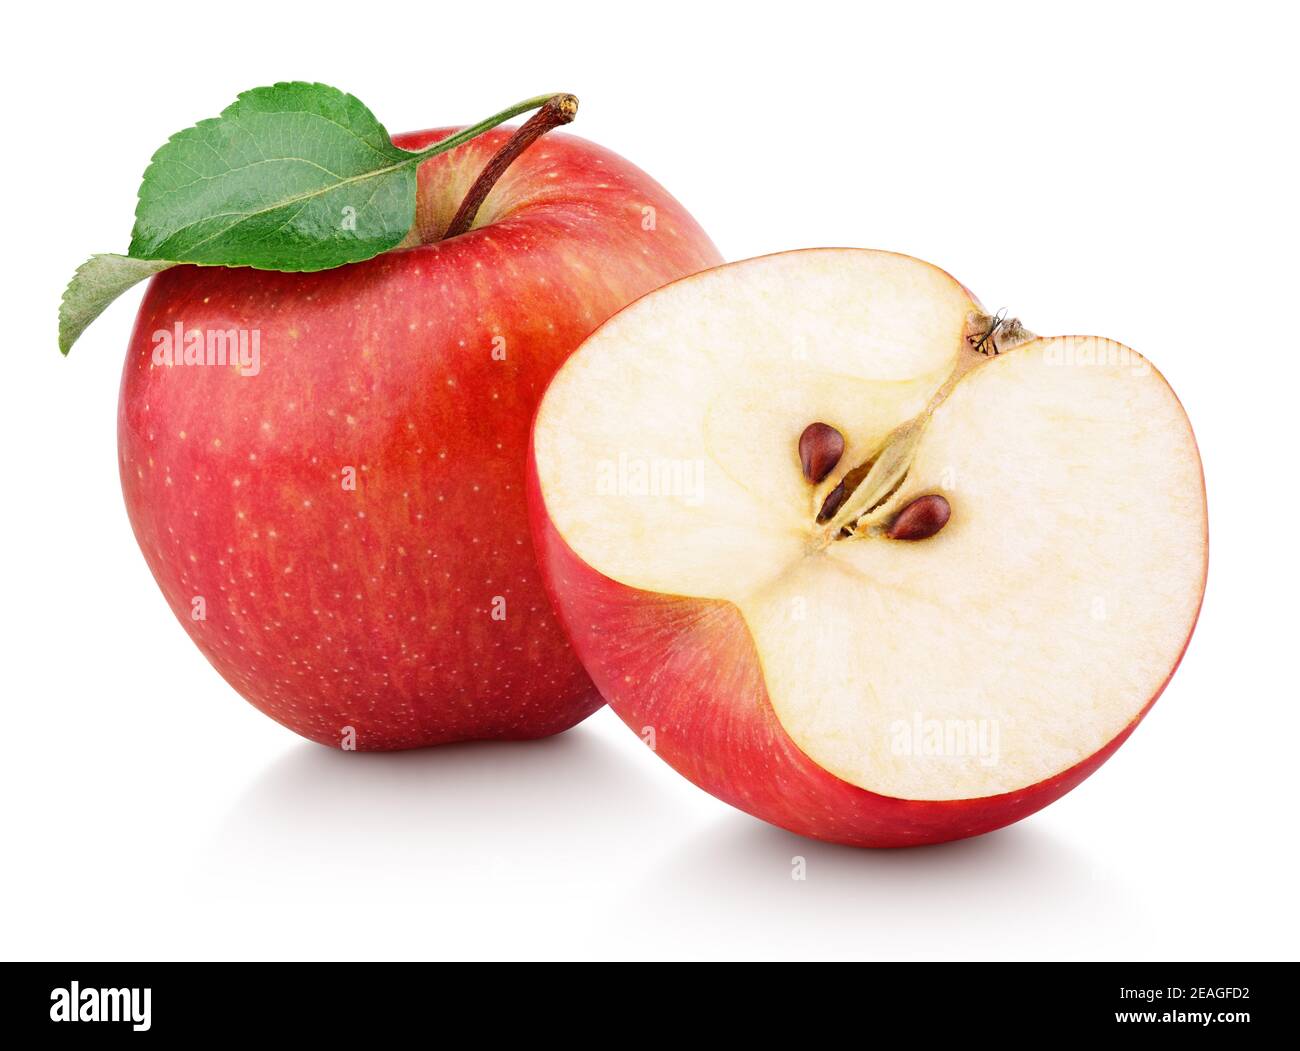 Ripe red apple fruit with apple half and green apple leaf isolated on white background. Apples and leaf with clipping path Stock Photo